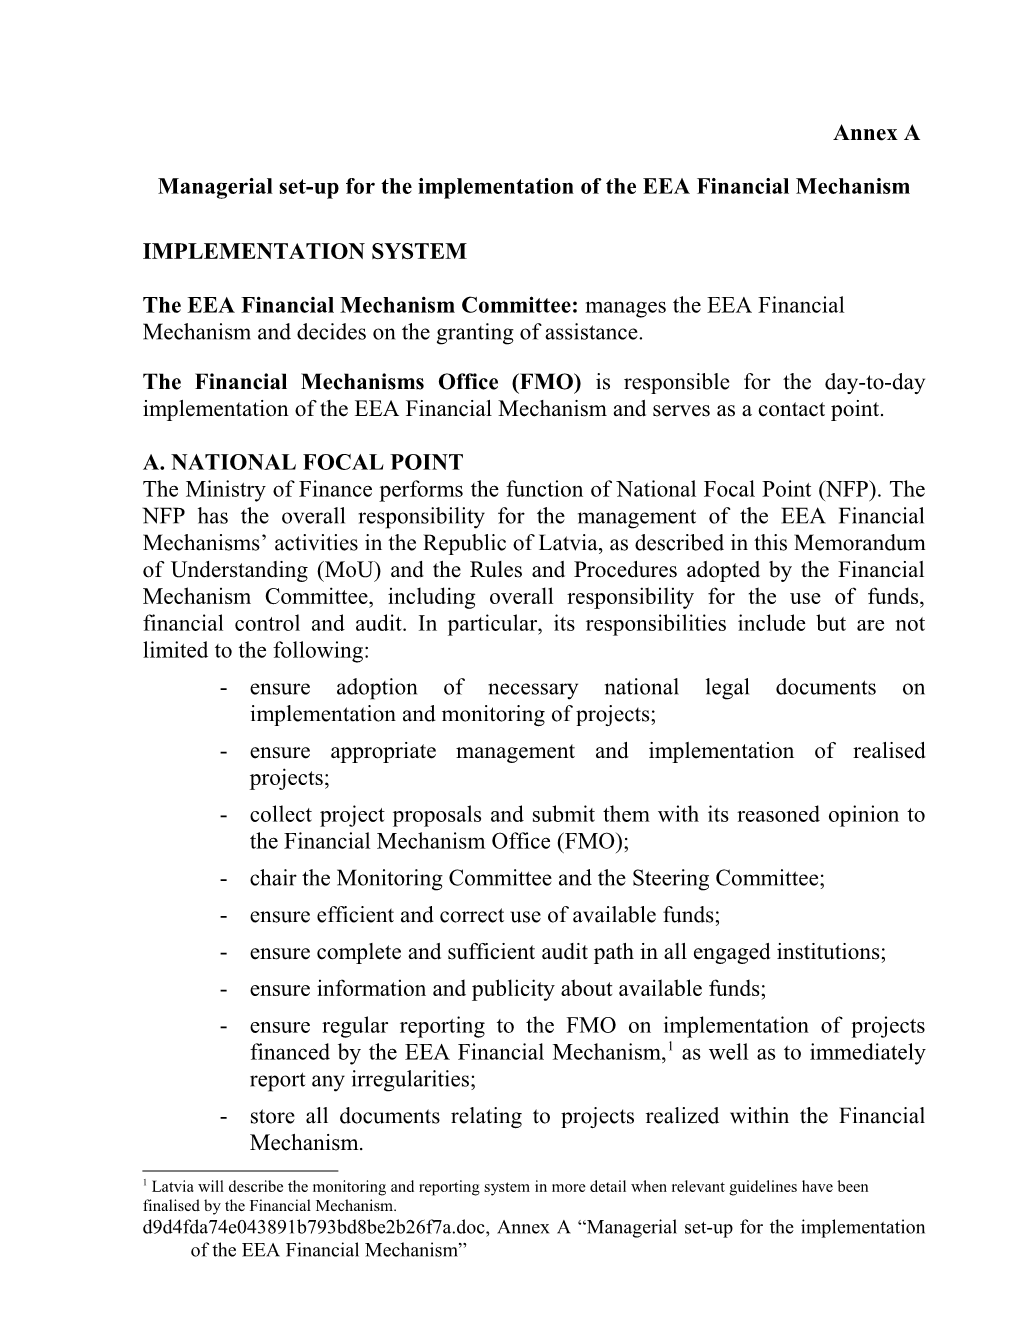 Managerial Set-Up for the Implementation of the EEA Financial Mechanism